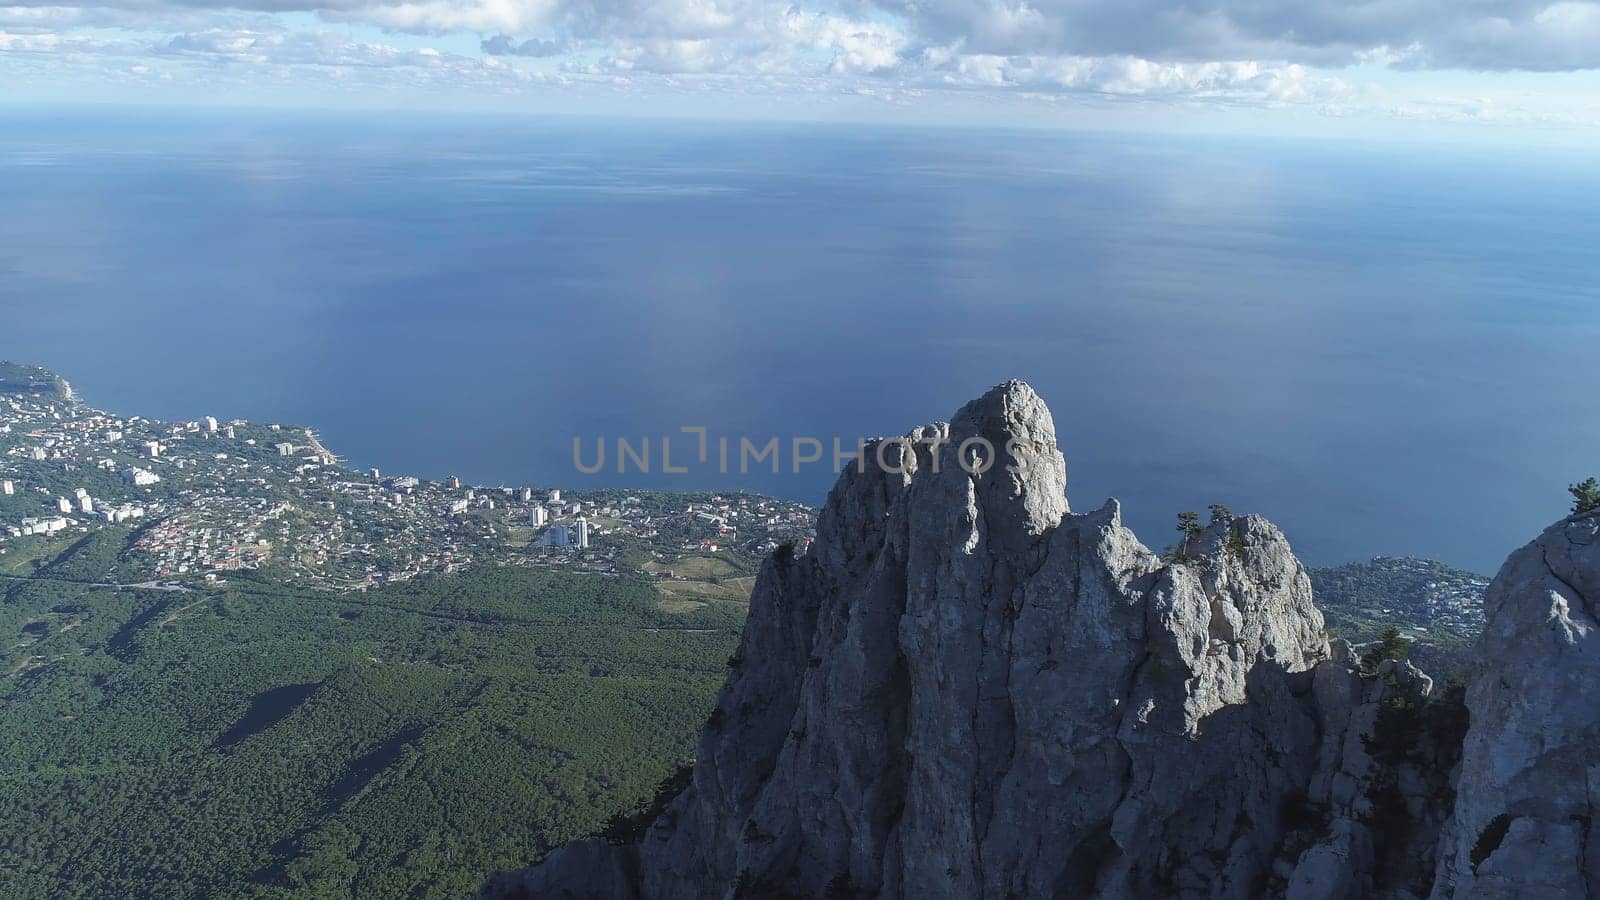 Gorgeous scenery of the blue sea and small city on the shore against beautiful white cliff and standing people with flags in summer day. Amazing view from above